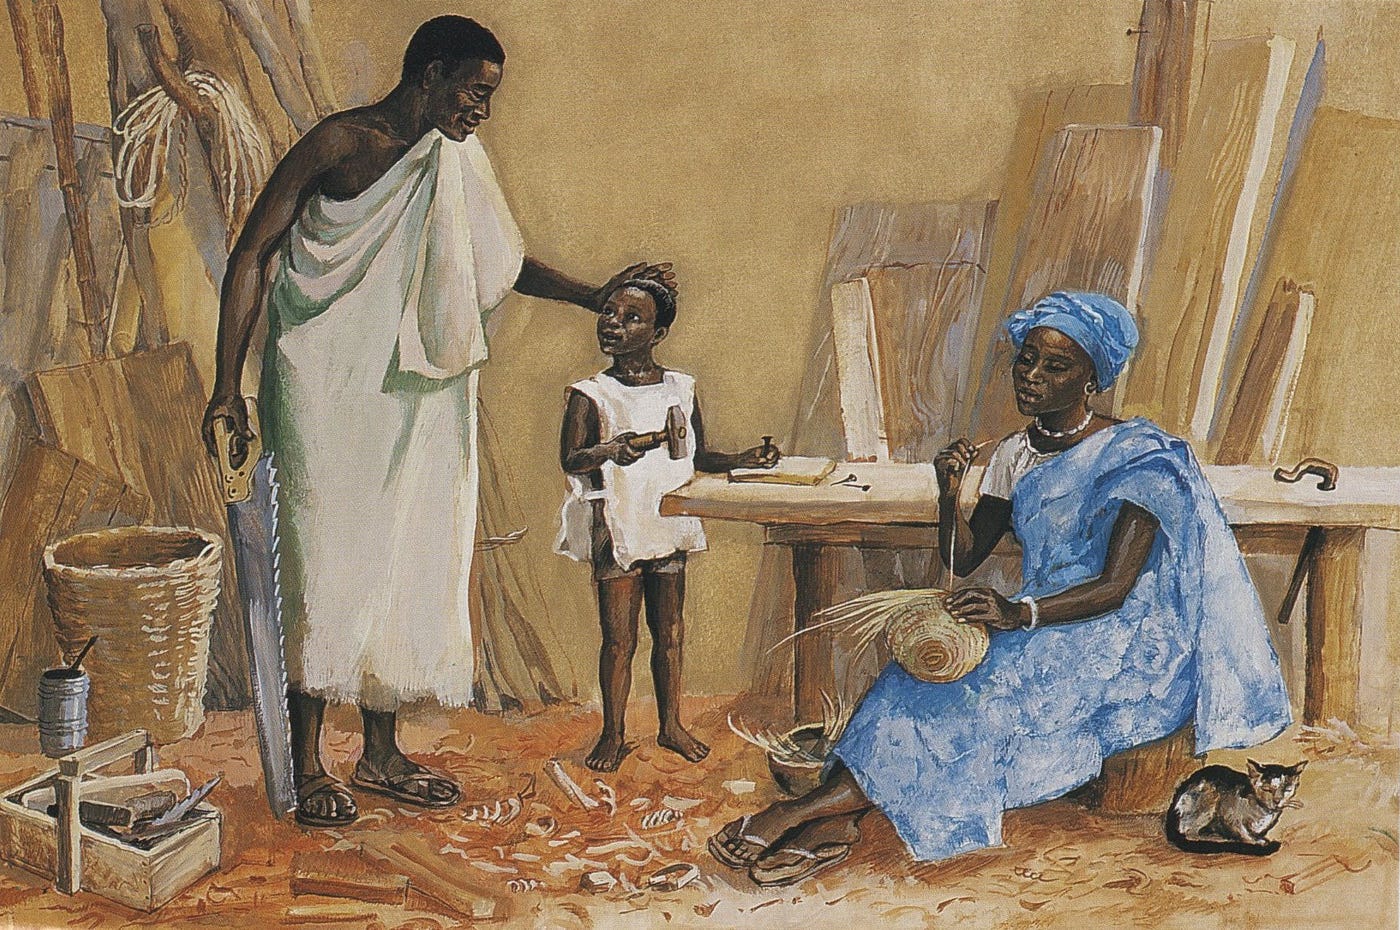 Painting of Jesus as a black boy using a hammer, Joseph watches, touching Jesus’ head warmly, Mary weaves a basket nearby